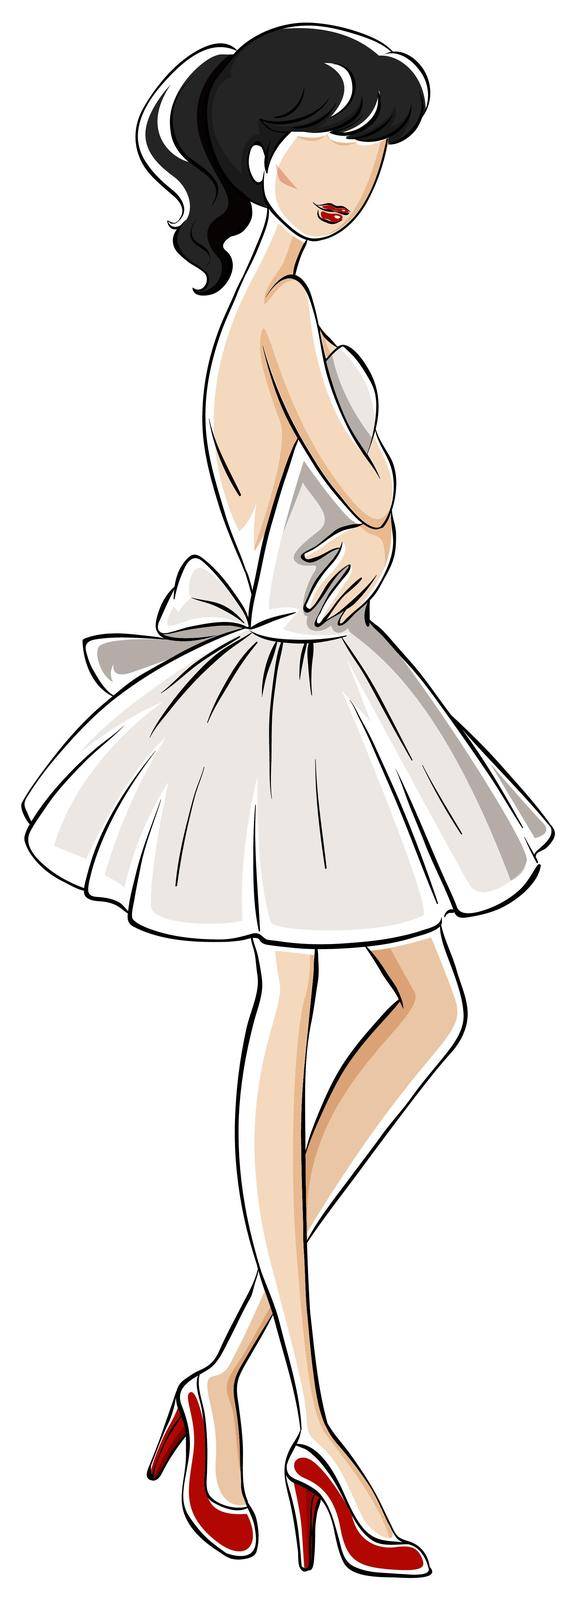 Sketch of a woman in white backless dress and red high heels